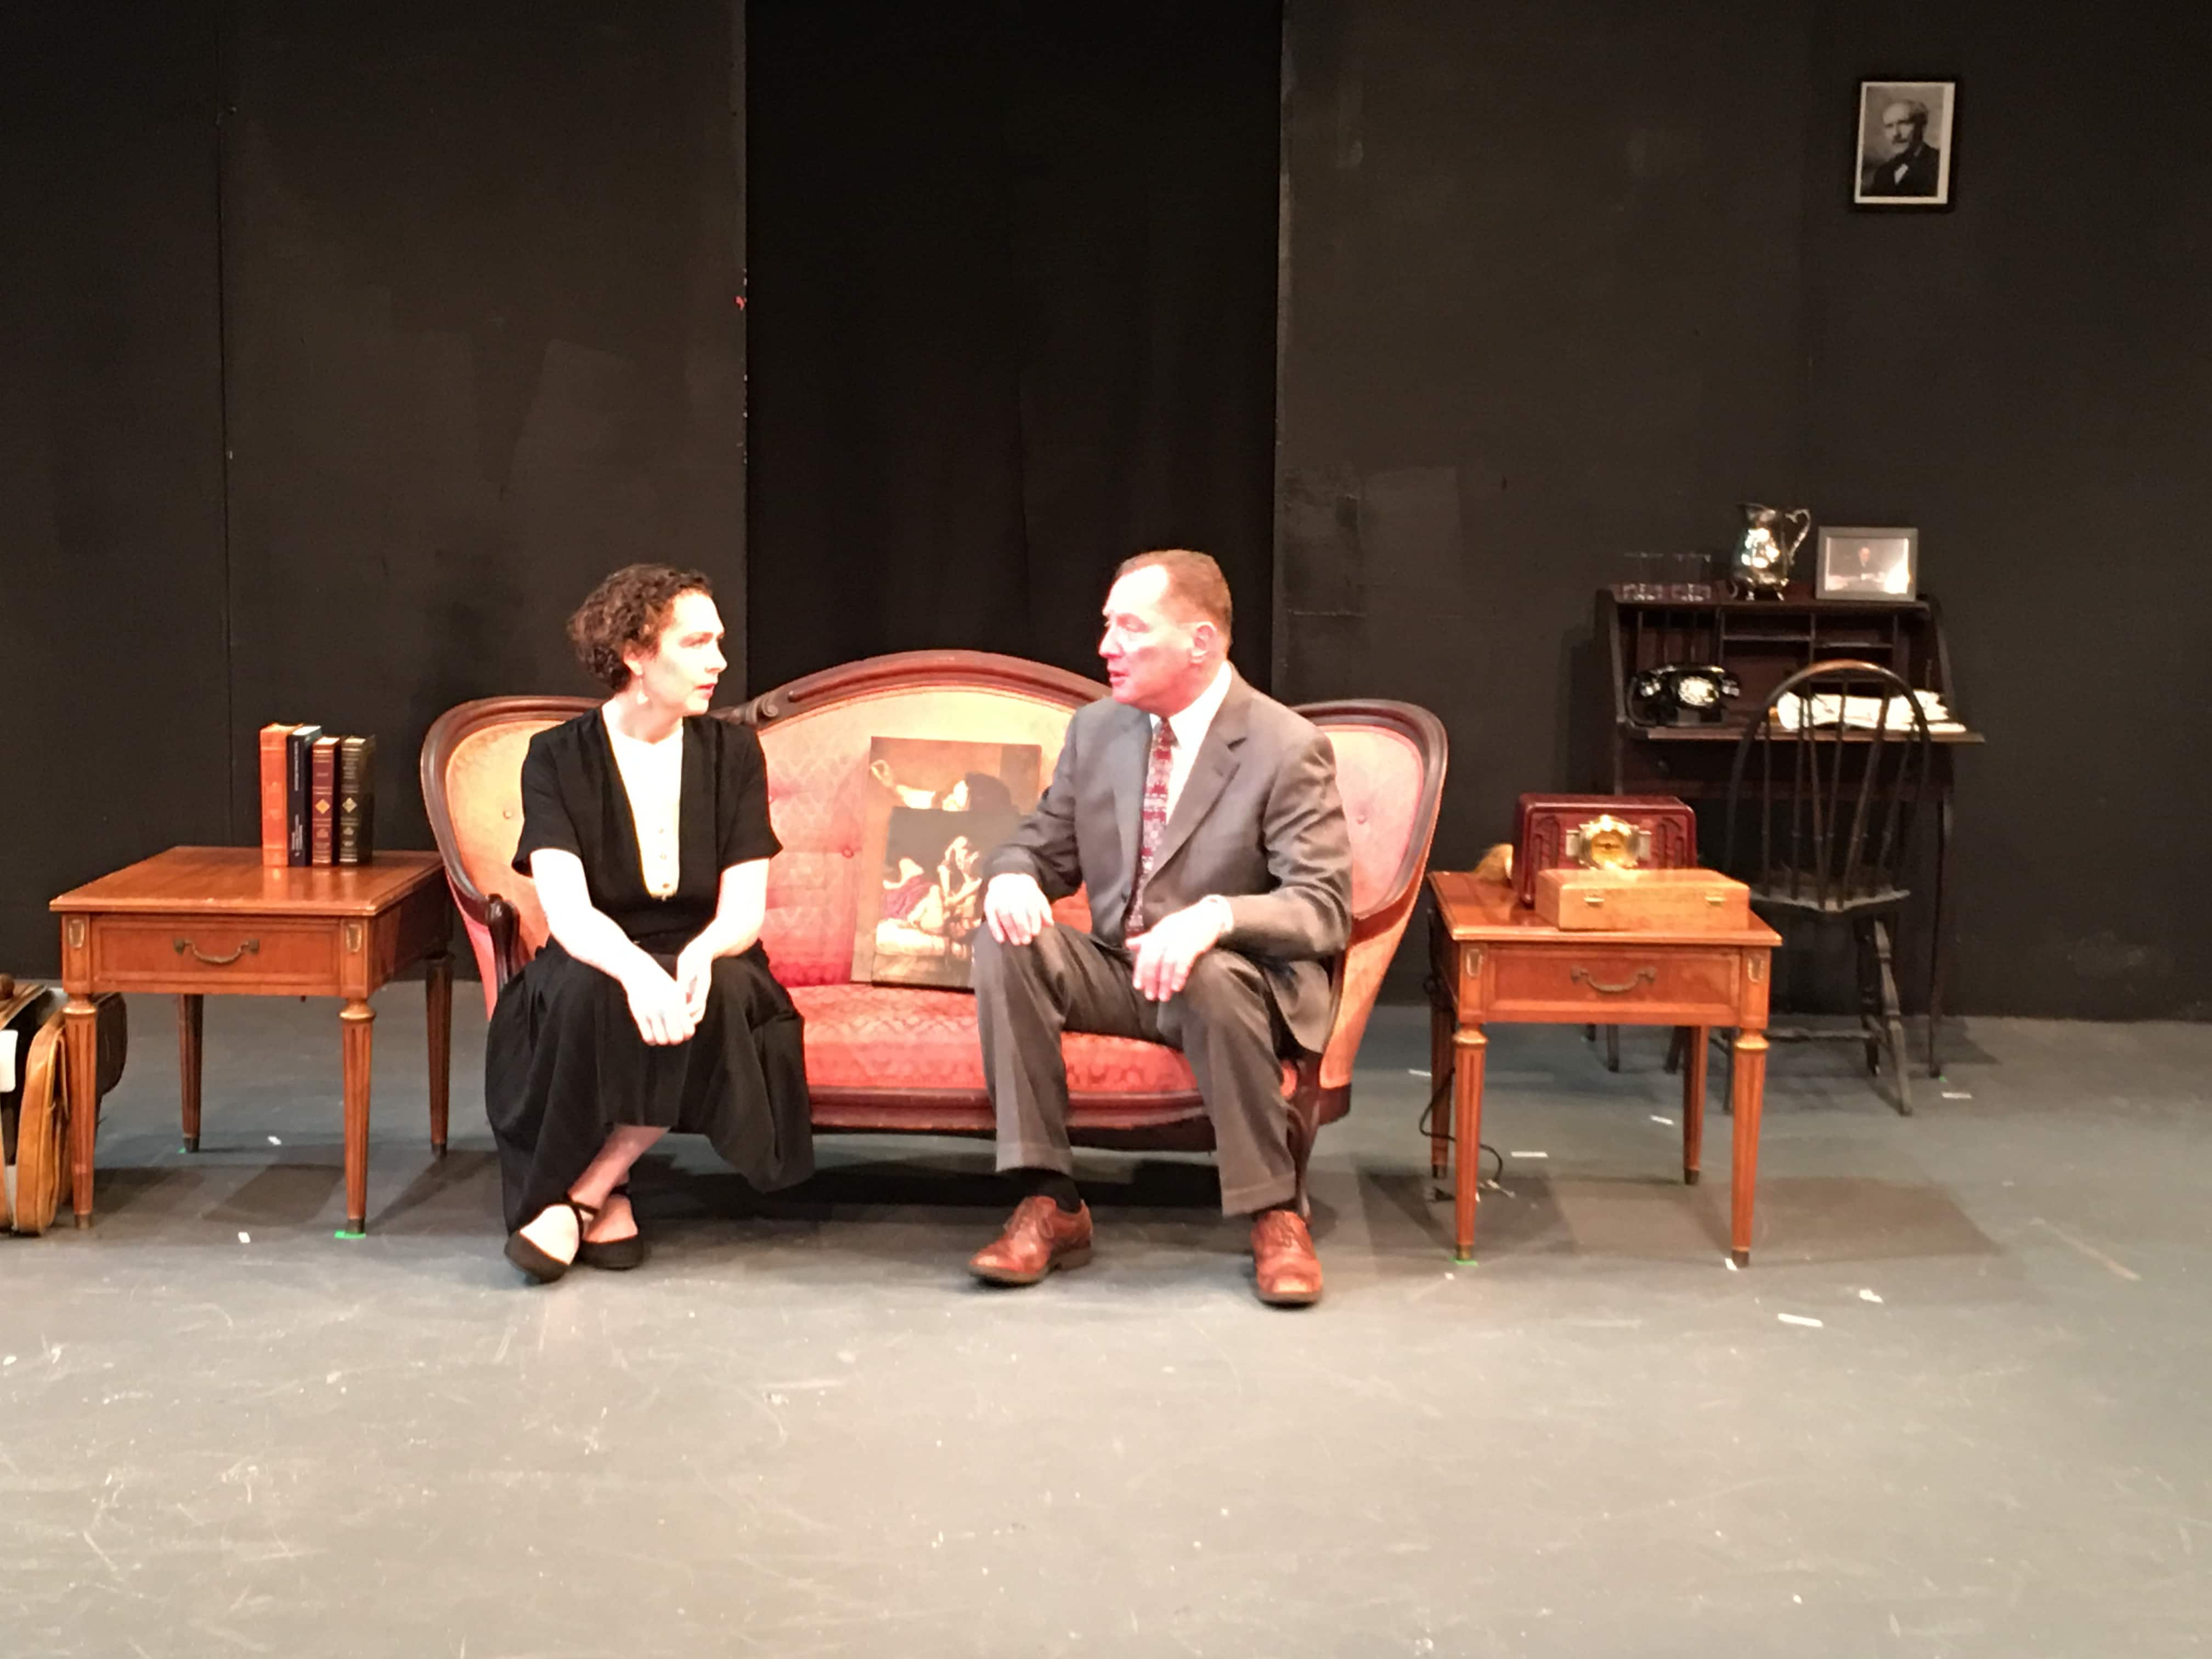 Margherita Sarfatti (Emily Canavan) and Benito Mussolini (Bob Cohen) in Margherita, now playing at the Greenbelt Arts Center. Photo by Sam Simon.